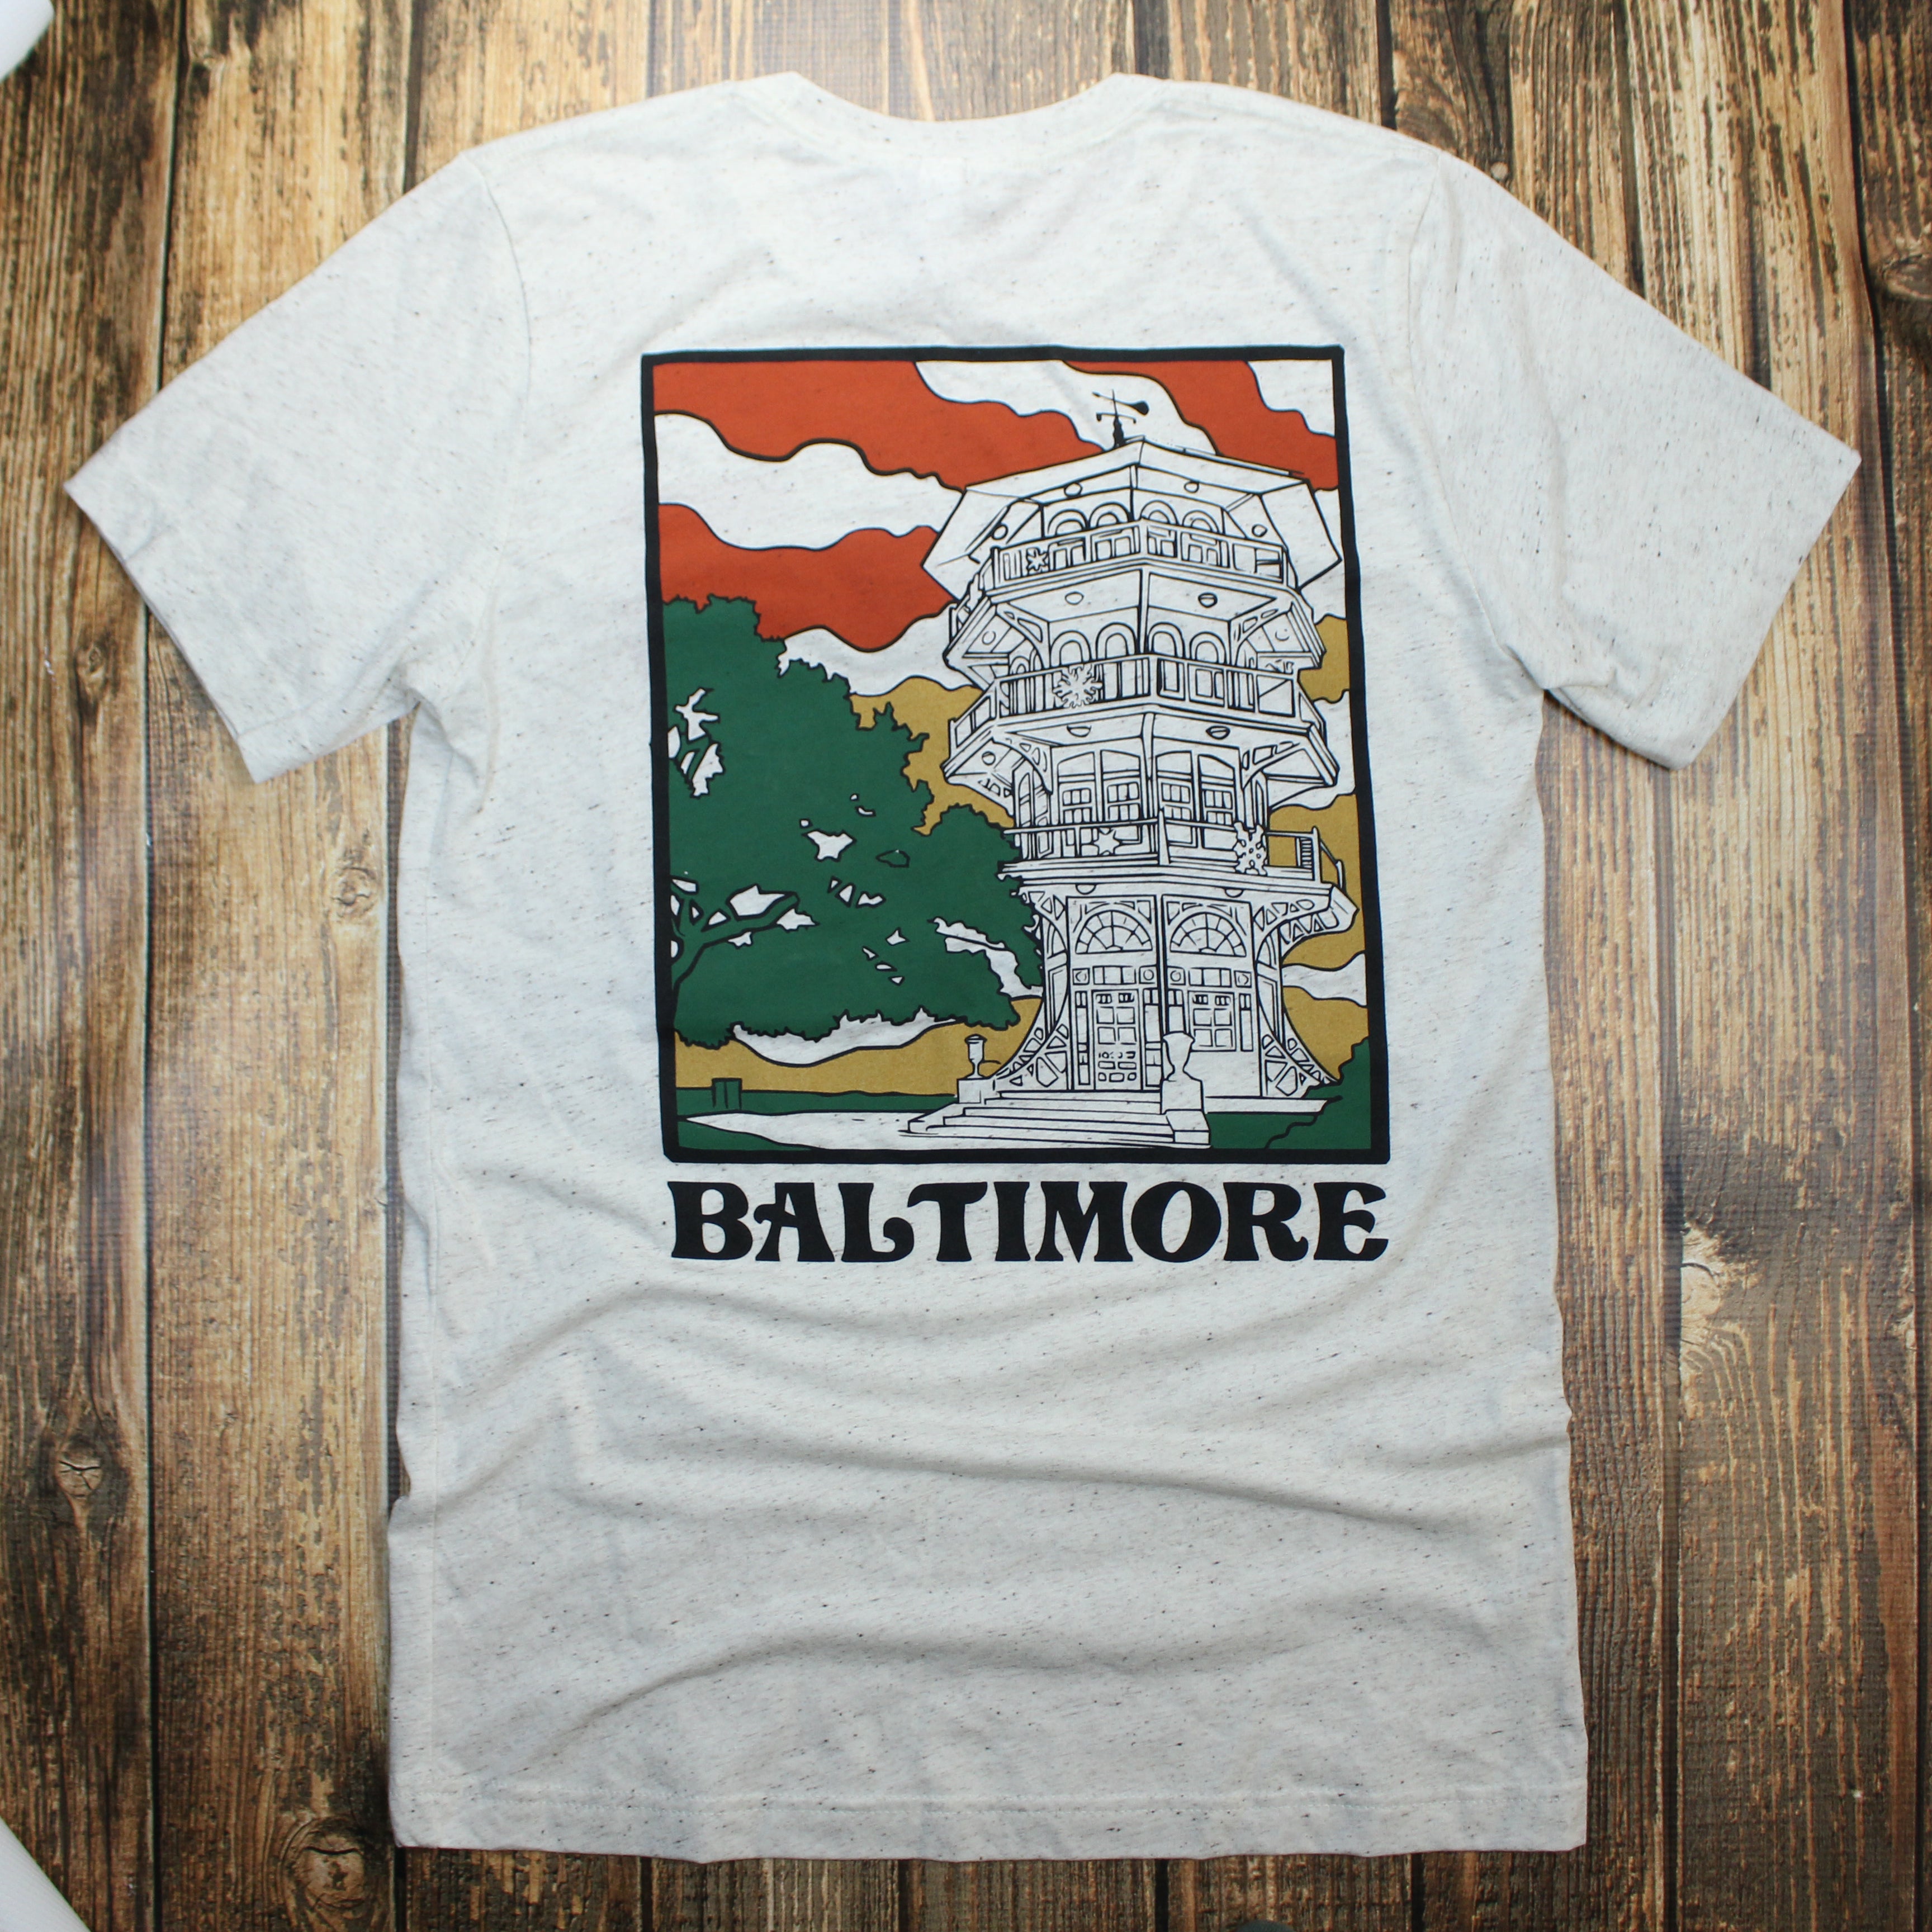 Patterson Park Pagoda (Oatmeal) / Shirt - Route One Apparel